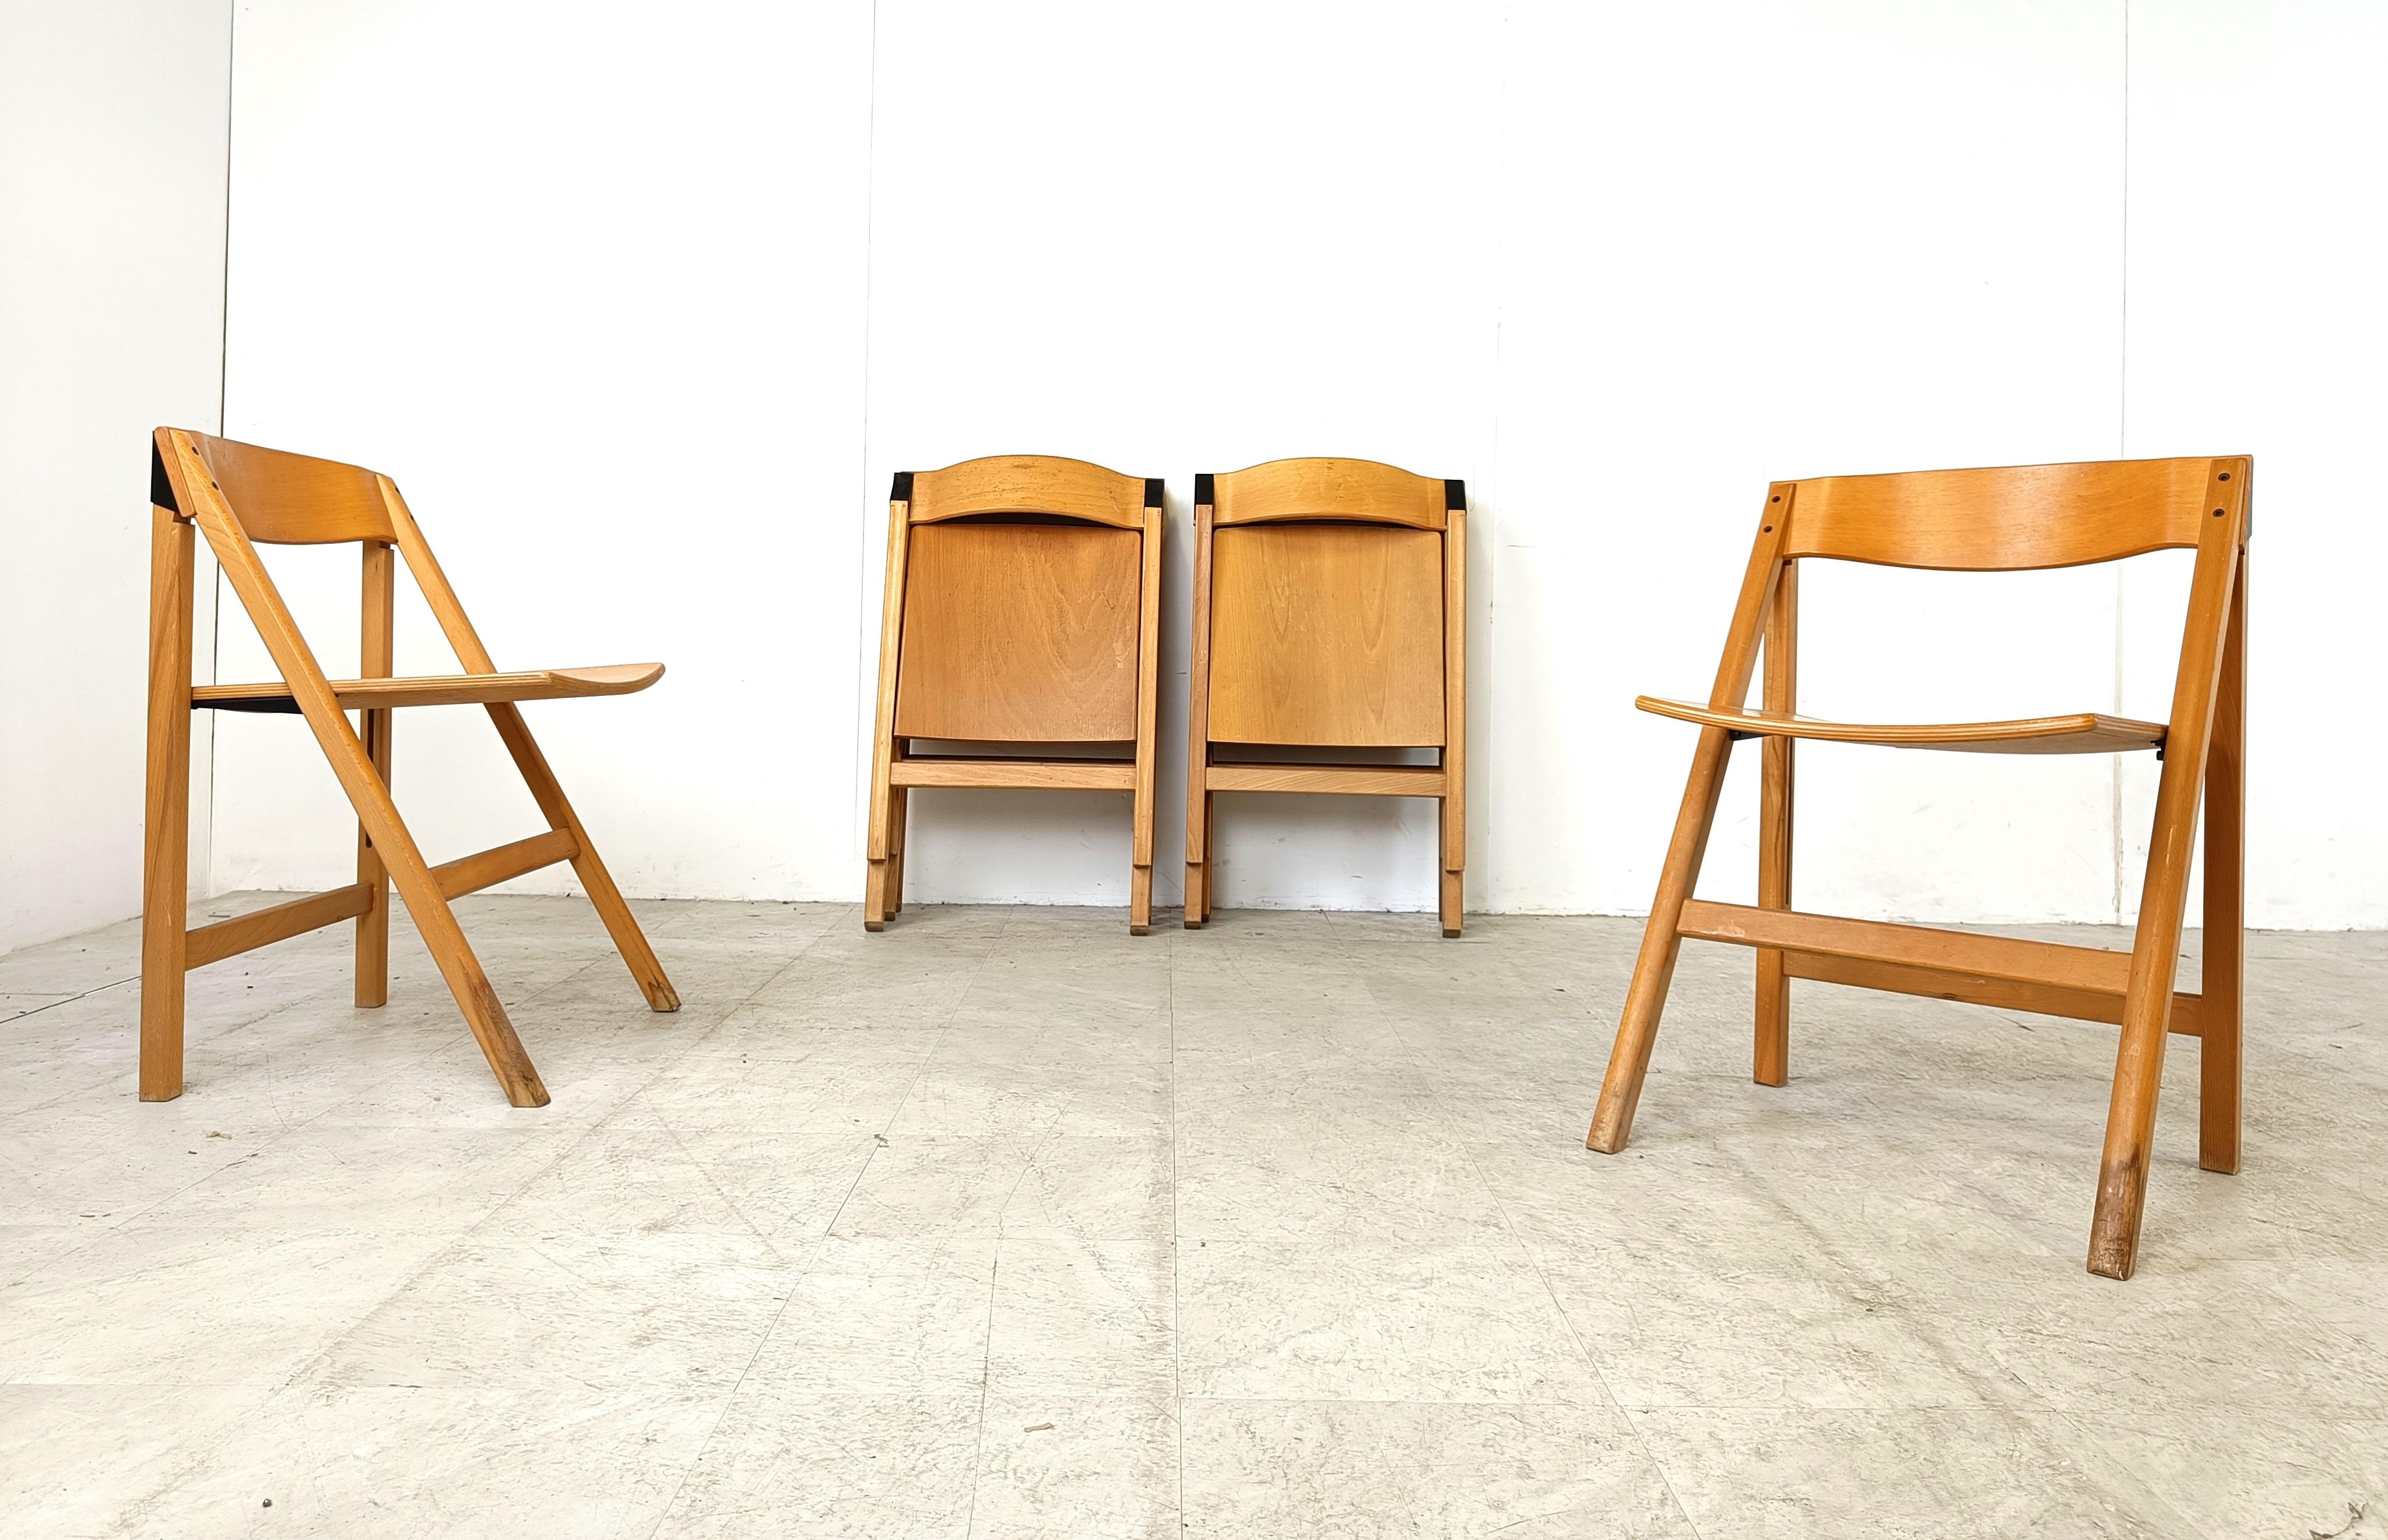 Plywood Vintage scandinavian folding chairs by Hyllinge Mobler, 1970s - set of 8 For Sale